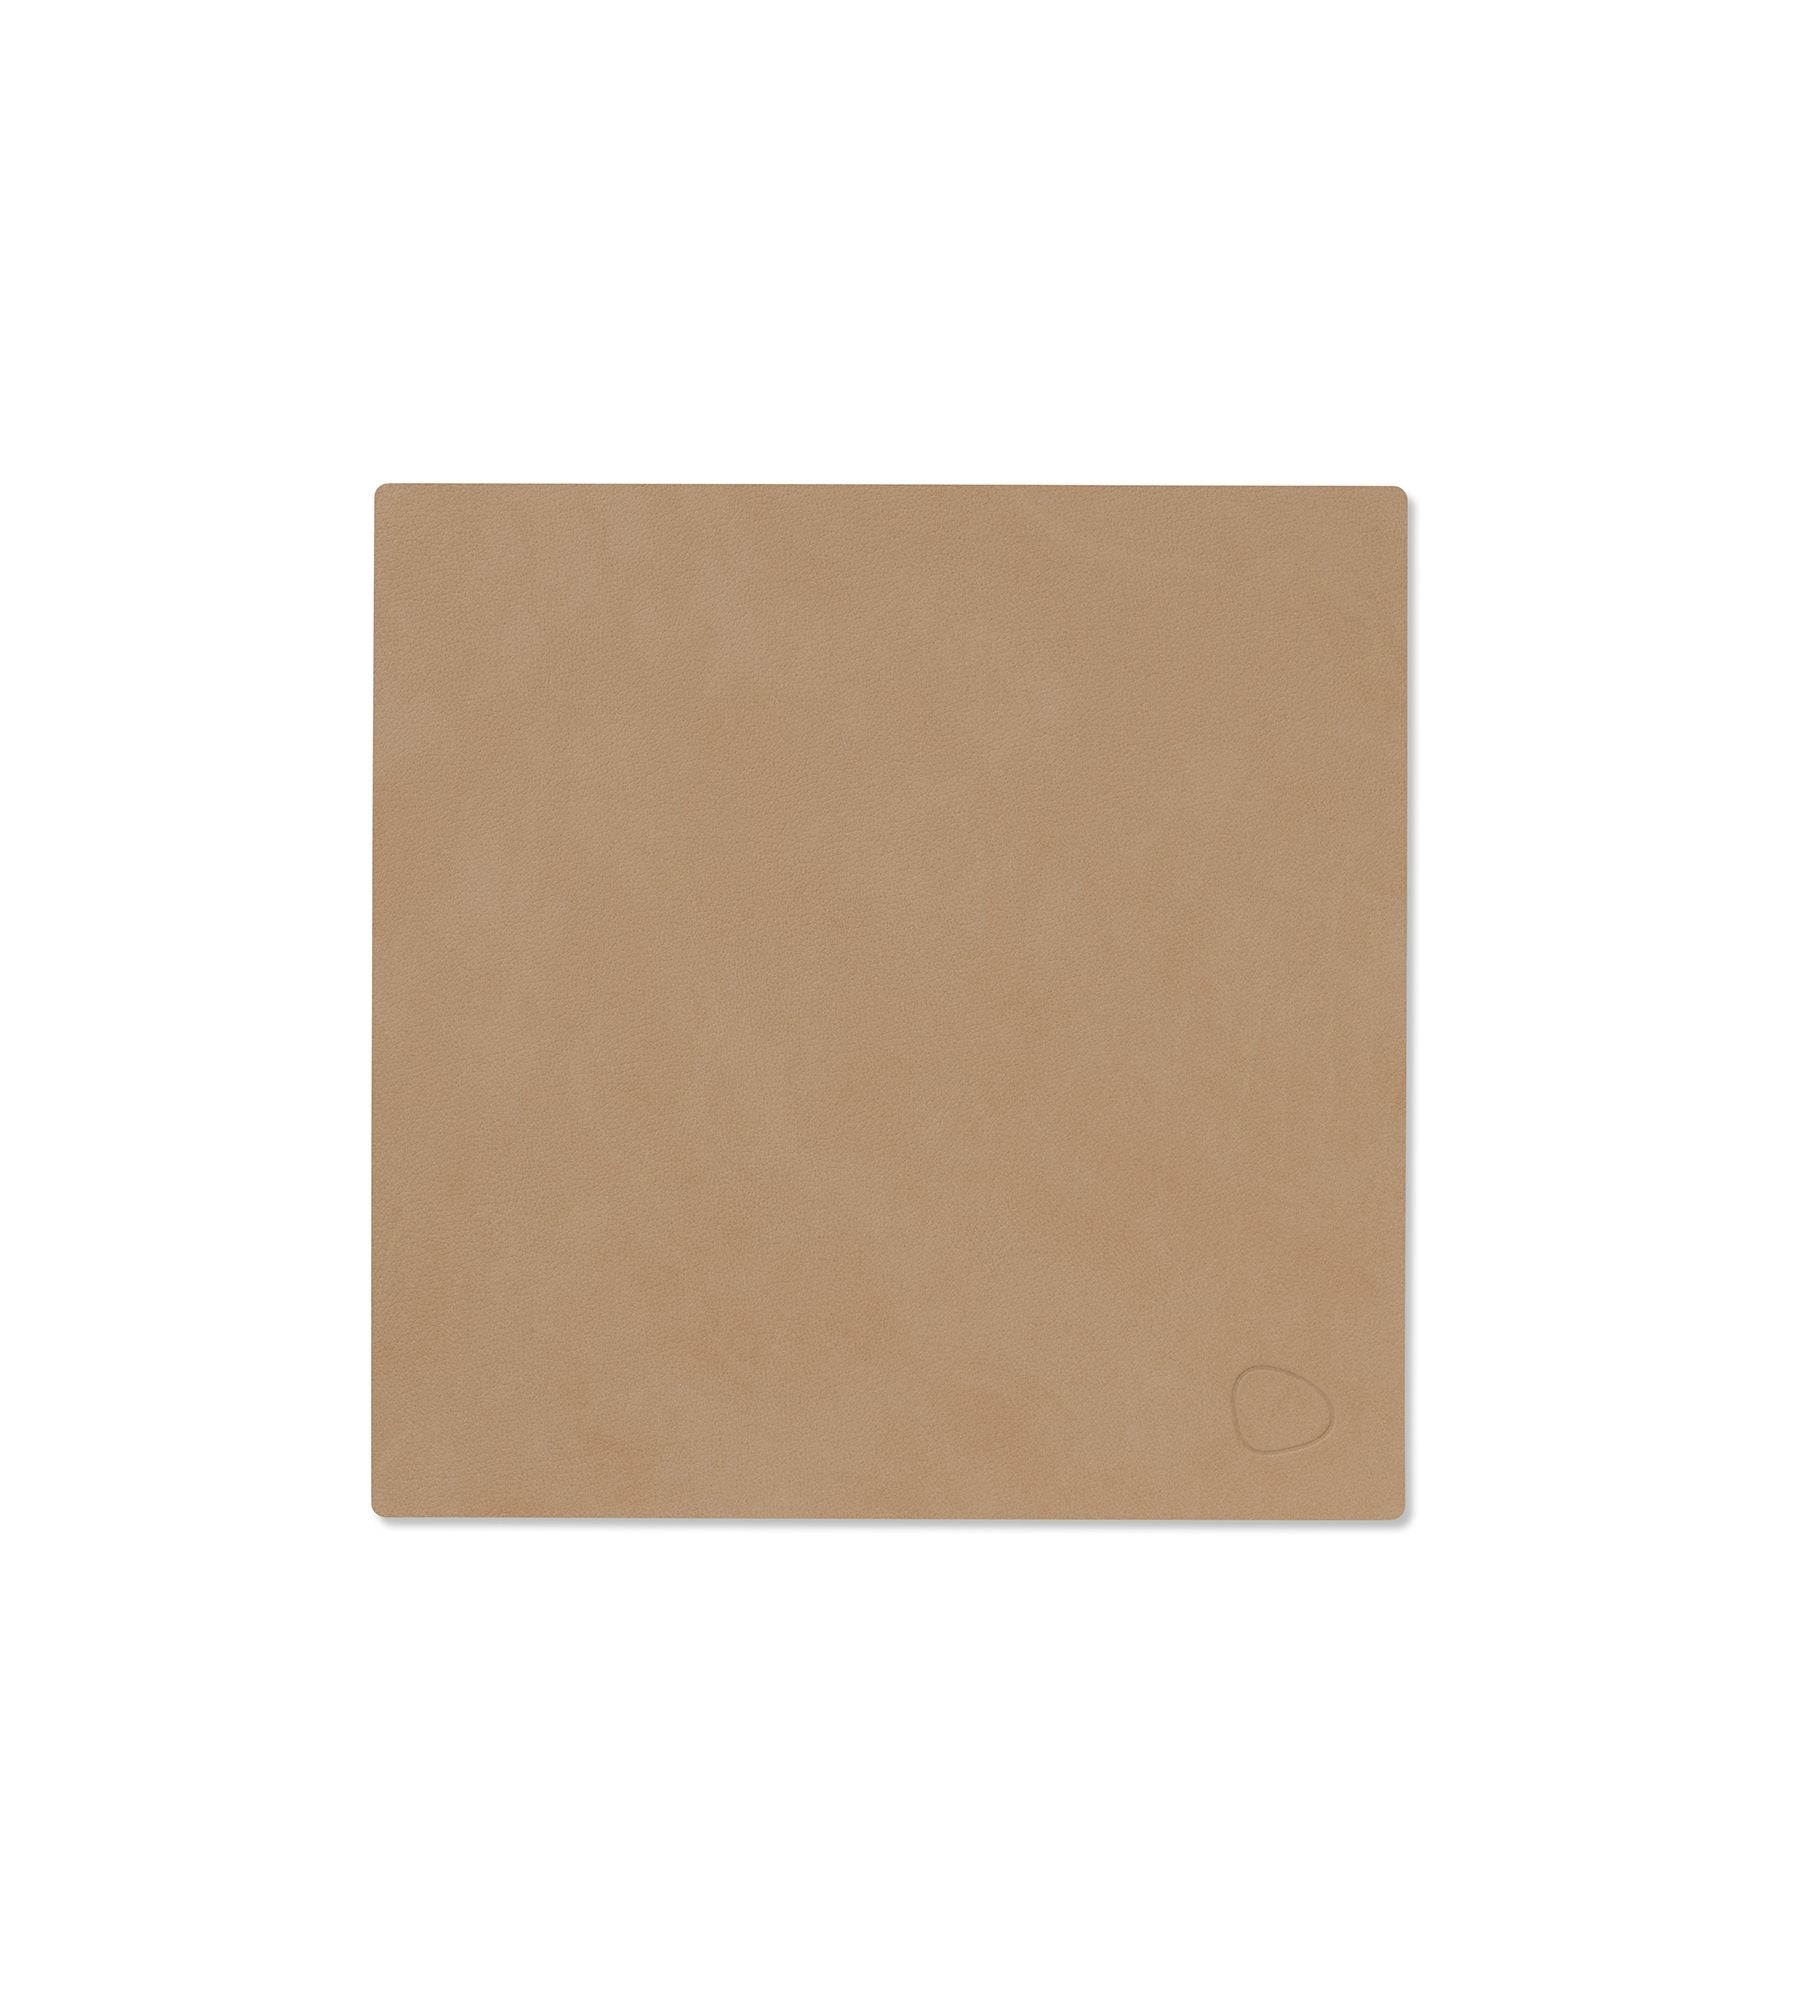 Lind Dna Tableau Mat Square Small, Nougat